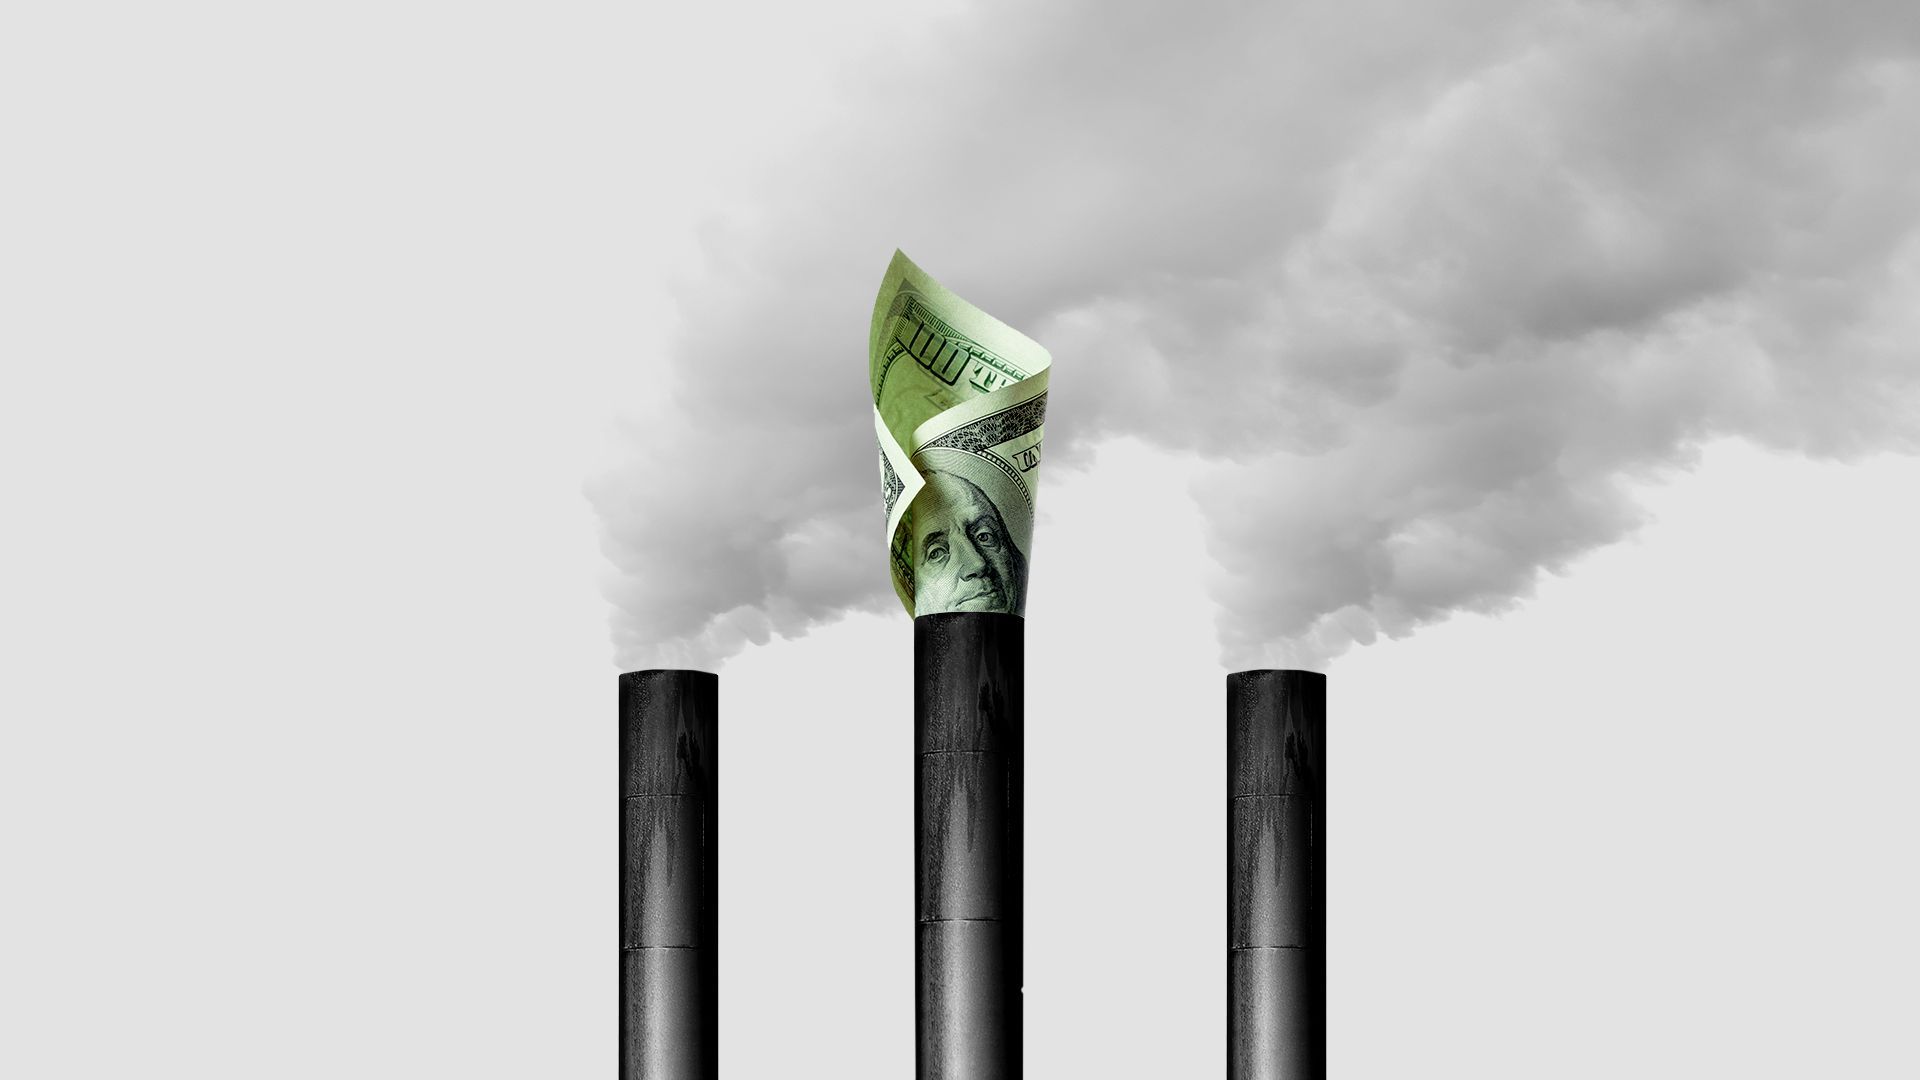 A dollar bill coming out of a smokestack.